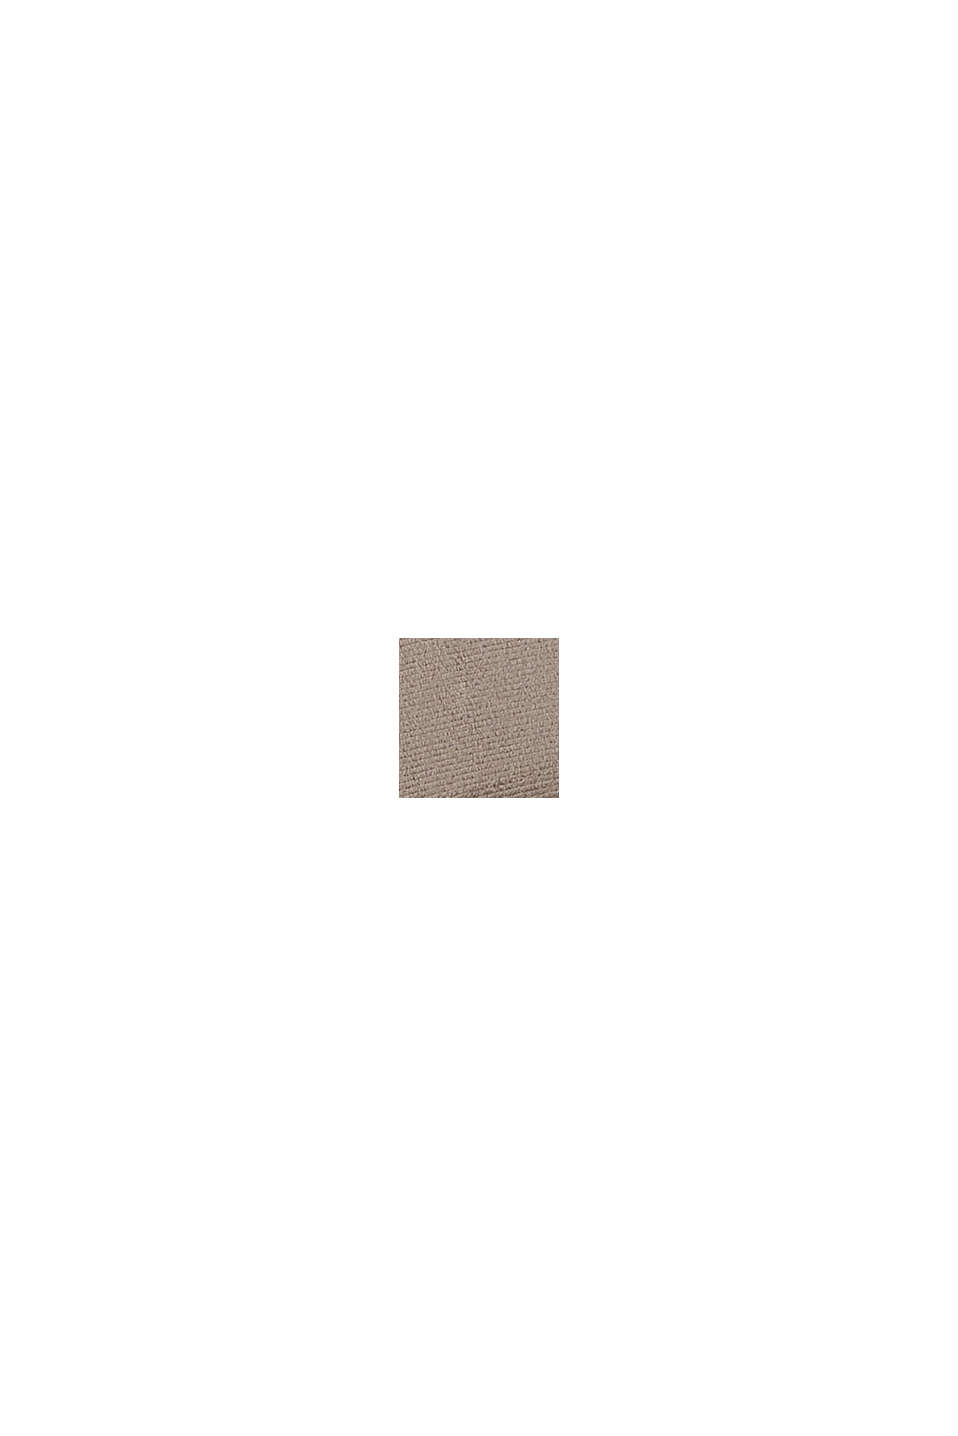 Picture frame made of micro velvet, BEIGE, swatch